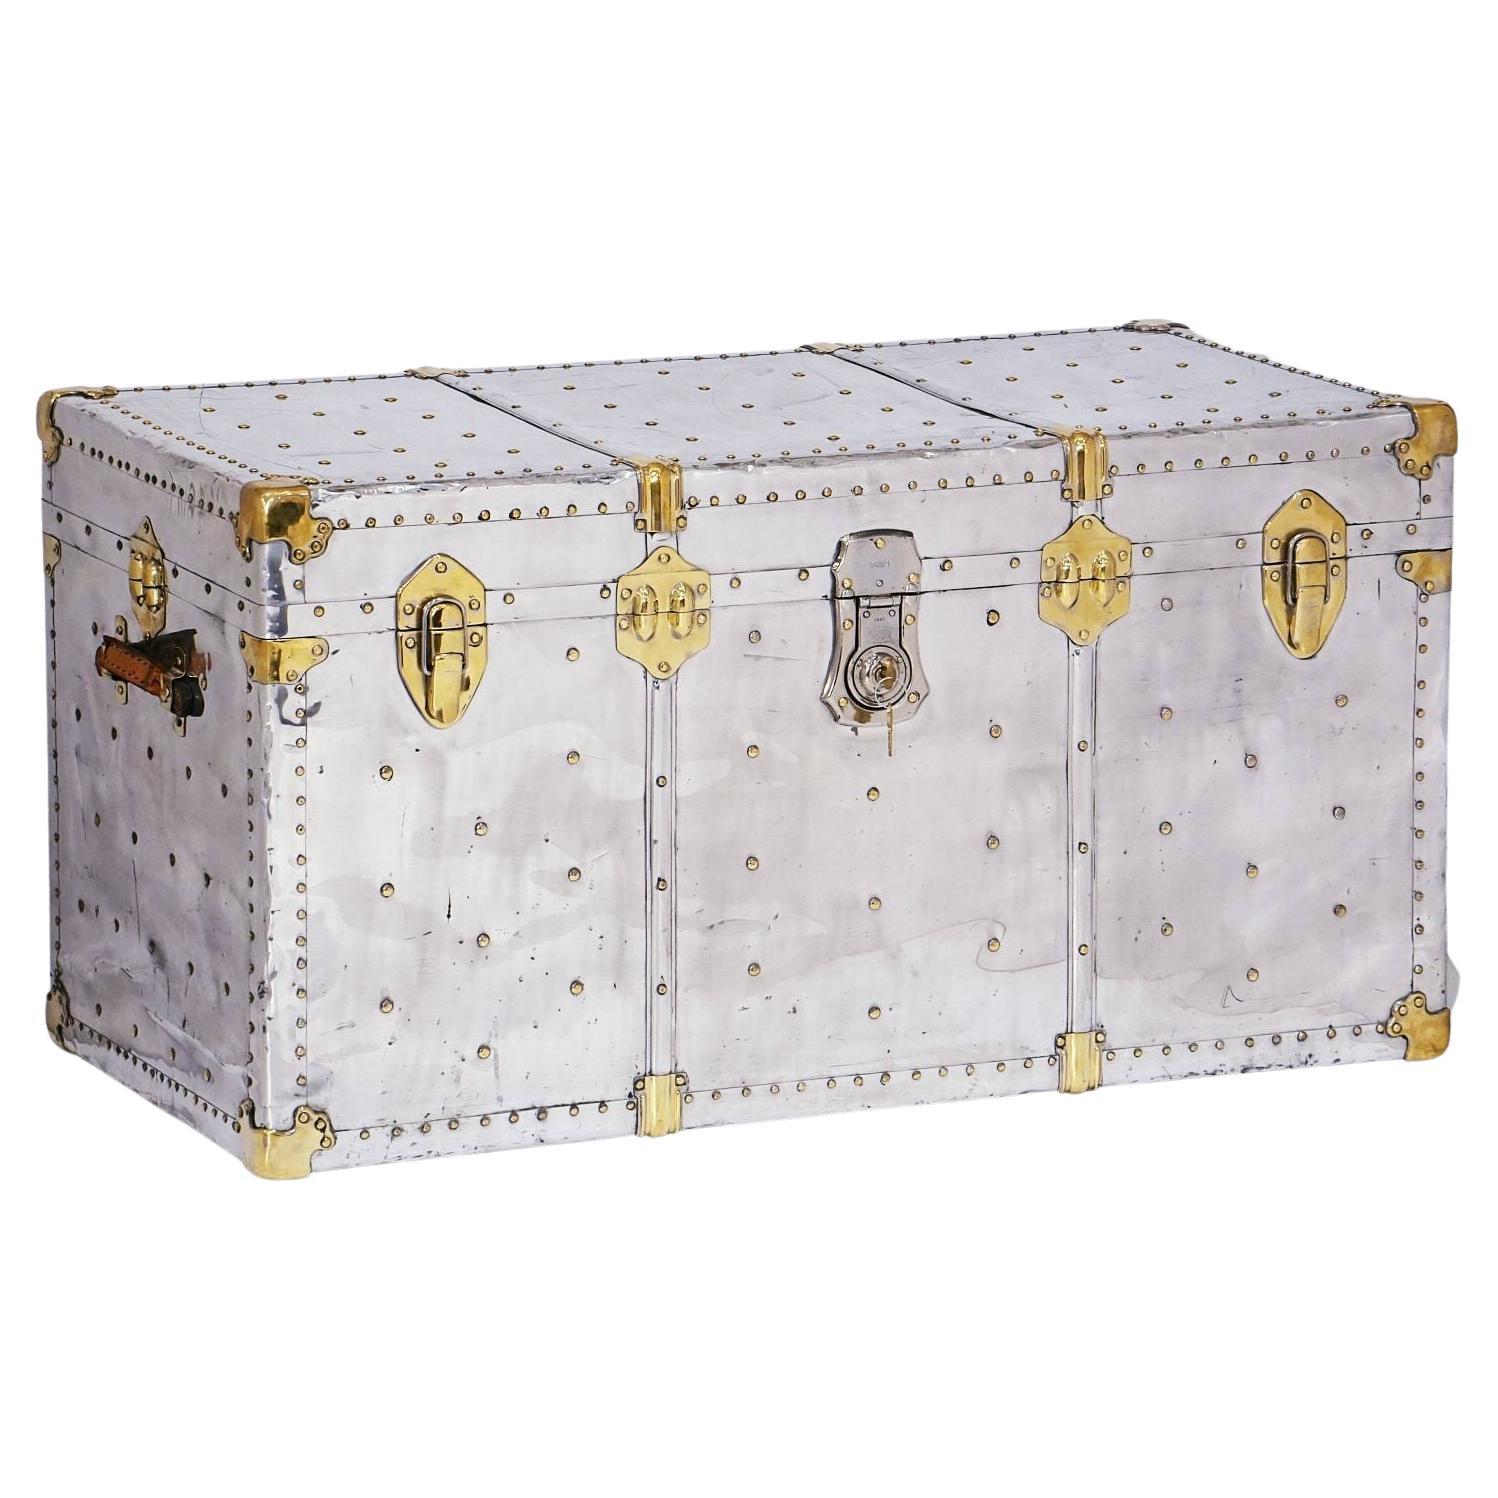 A fine large English steamer trunk featuring a polished aluminum-clad body, with brass nail-head accents and heavy brass mounts and hardware, and original leather handles. Opening to an interior lined with blue and white gingham ticking.

With its